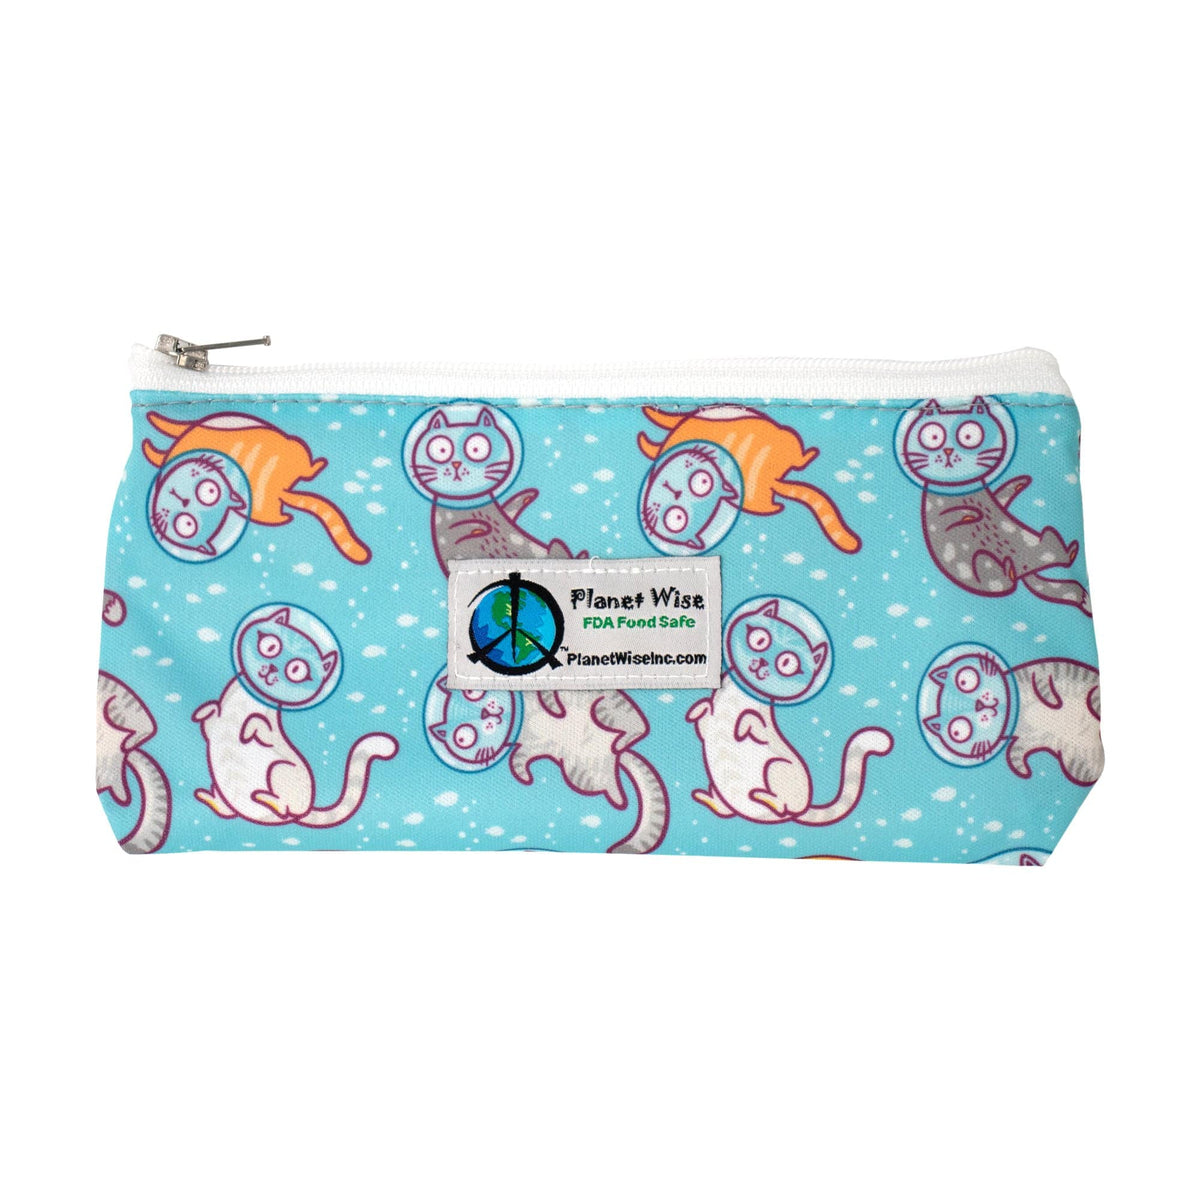 Planet Wise Reusable Printed Zipper Snack Bag Cat-a-strophic